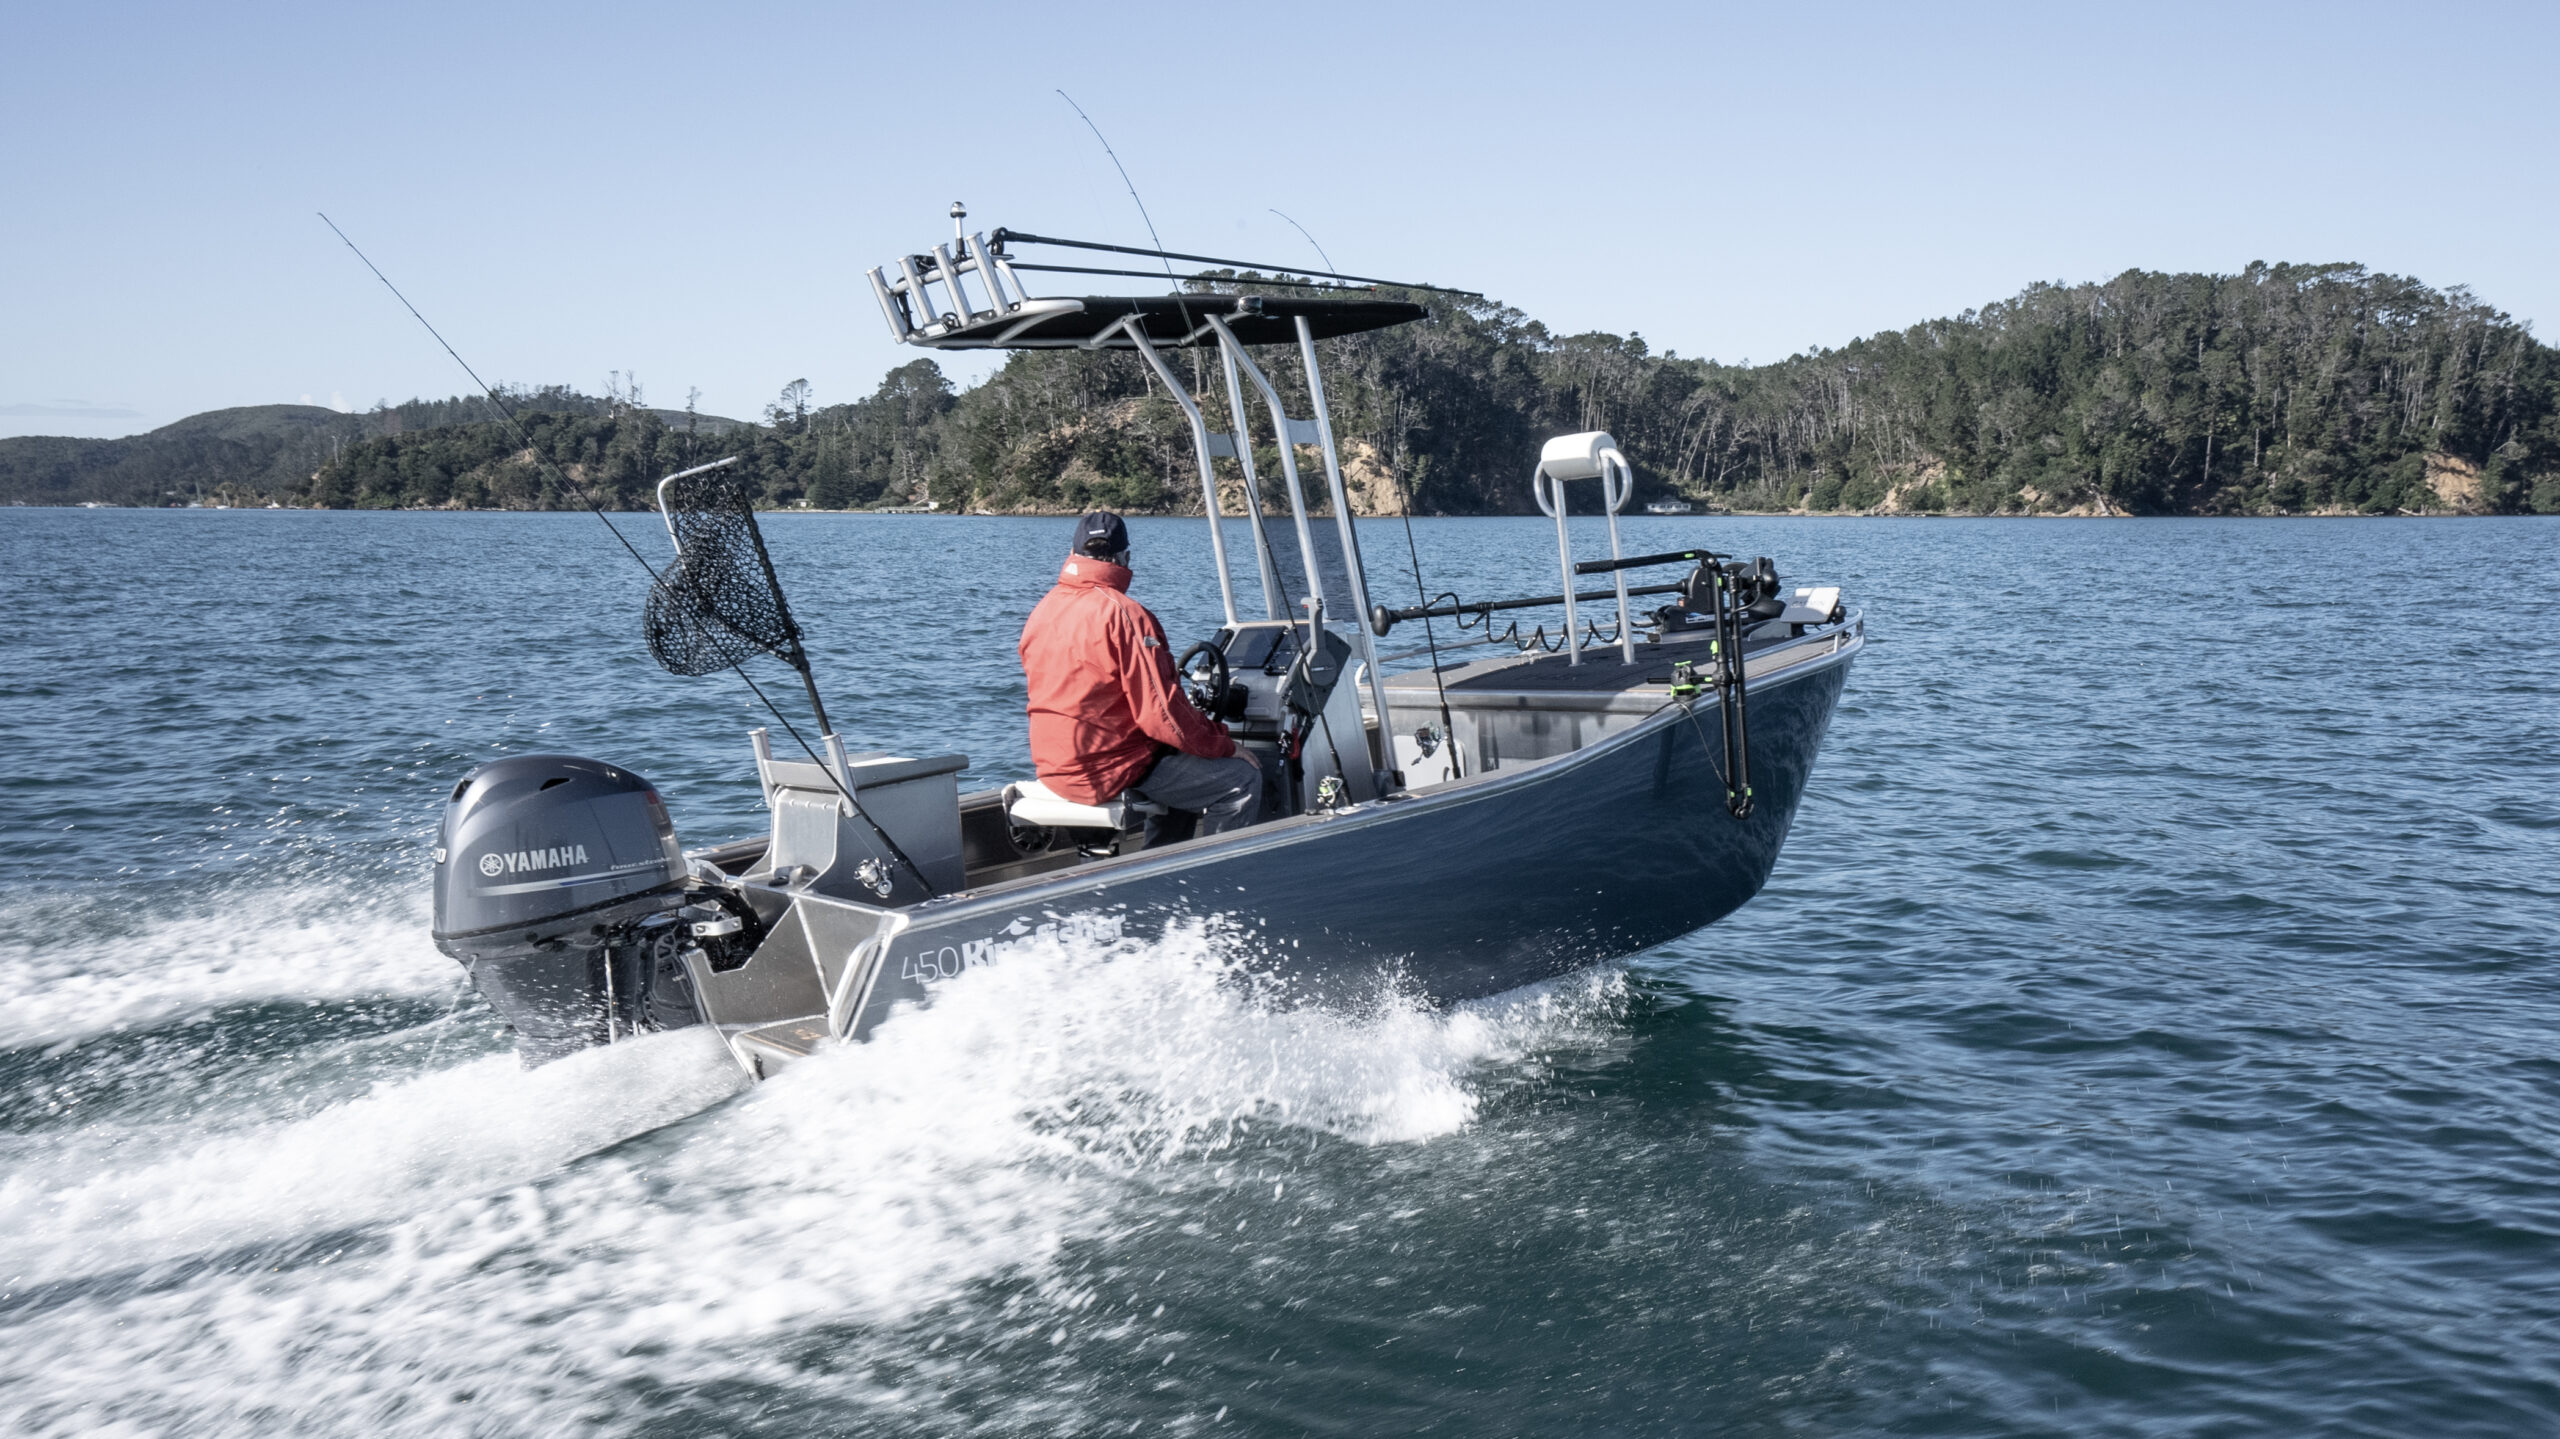 NZ fishing news rave review - 450 Centre Console